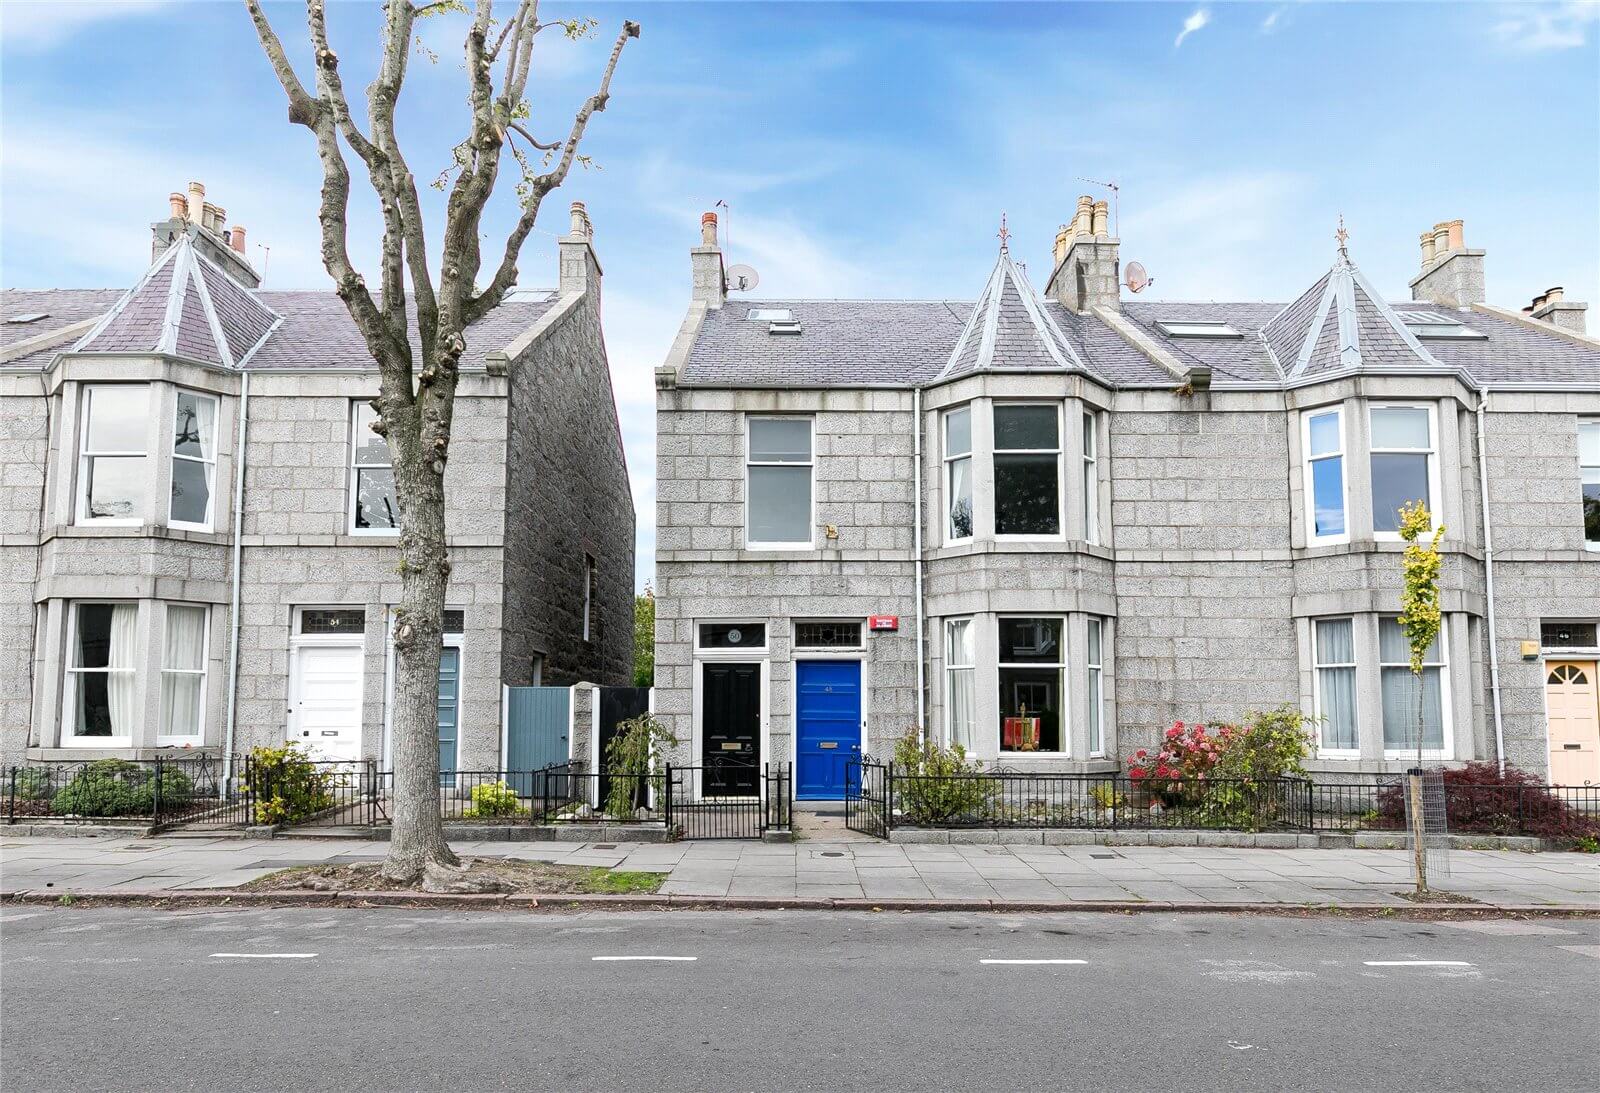 Our latest properties for sale and to let (8th August 2019)